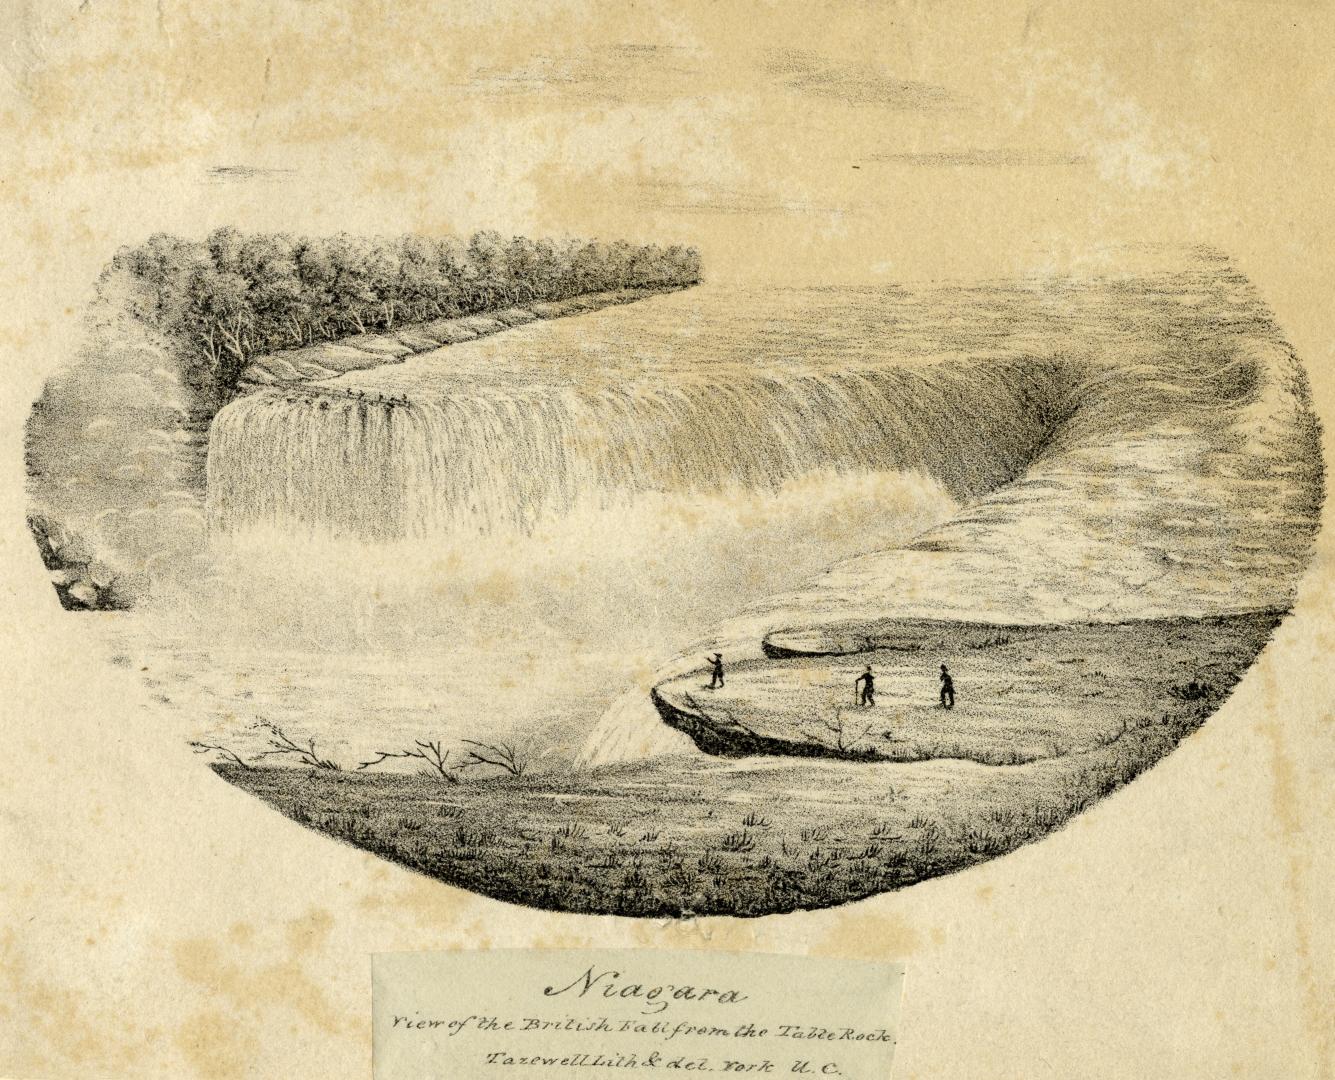 Niagara, View of the British Fall from the Table Rock